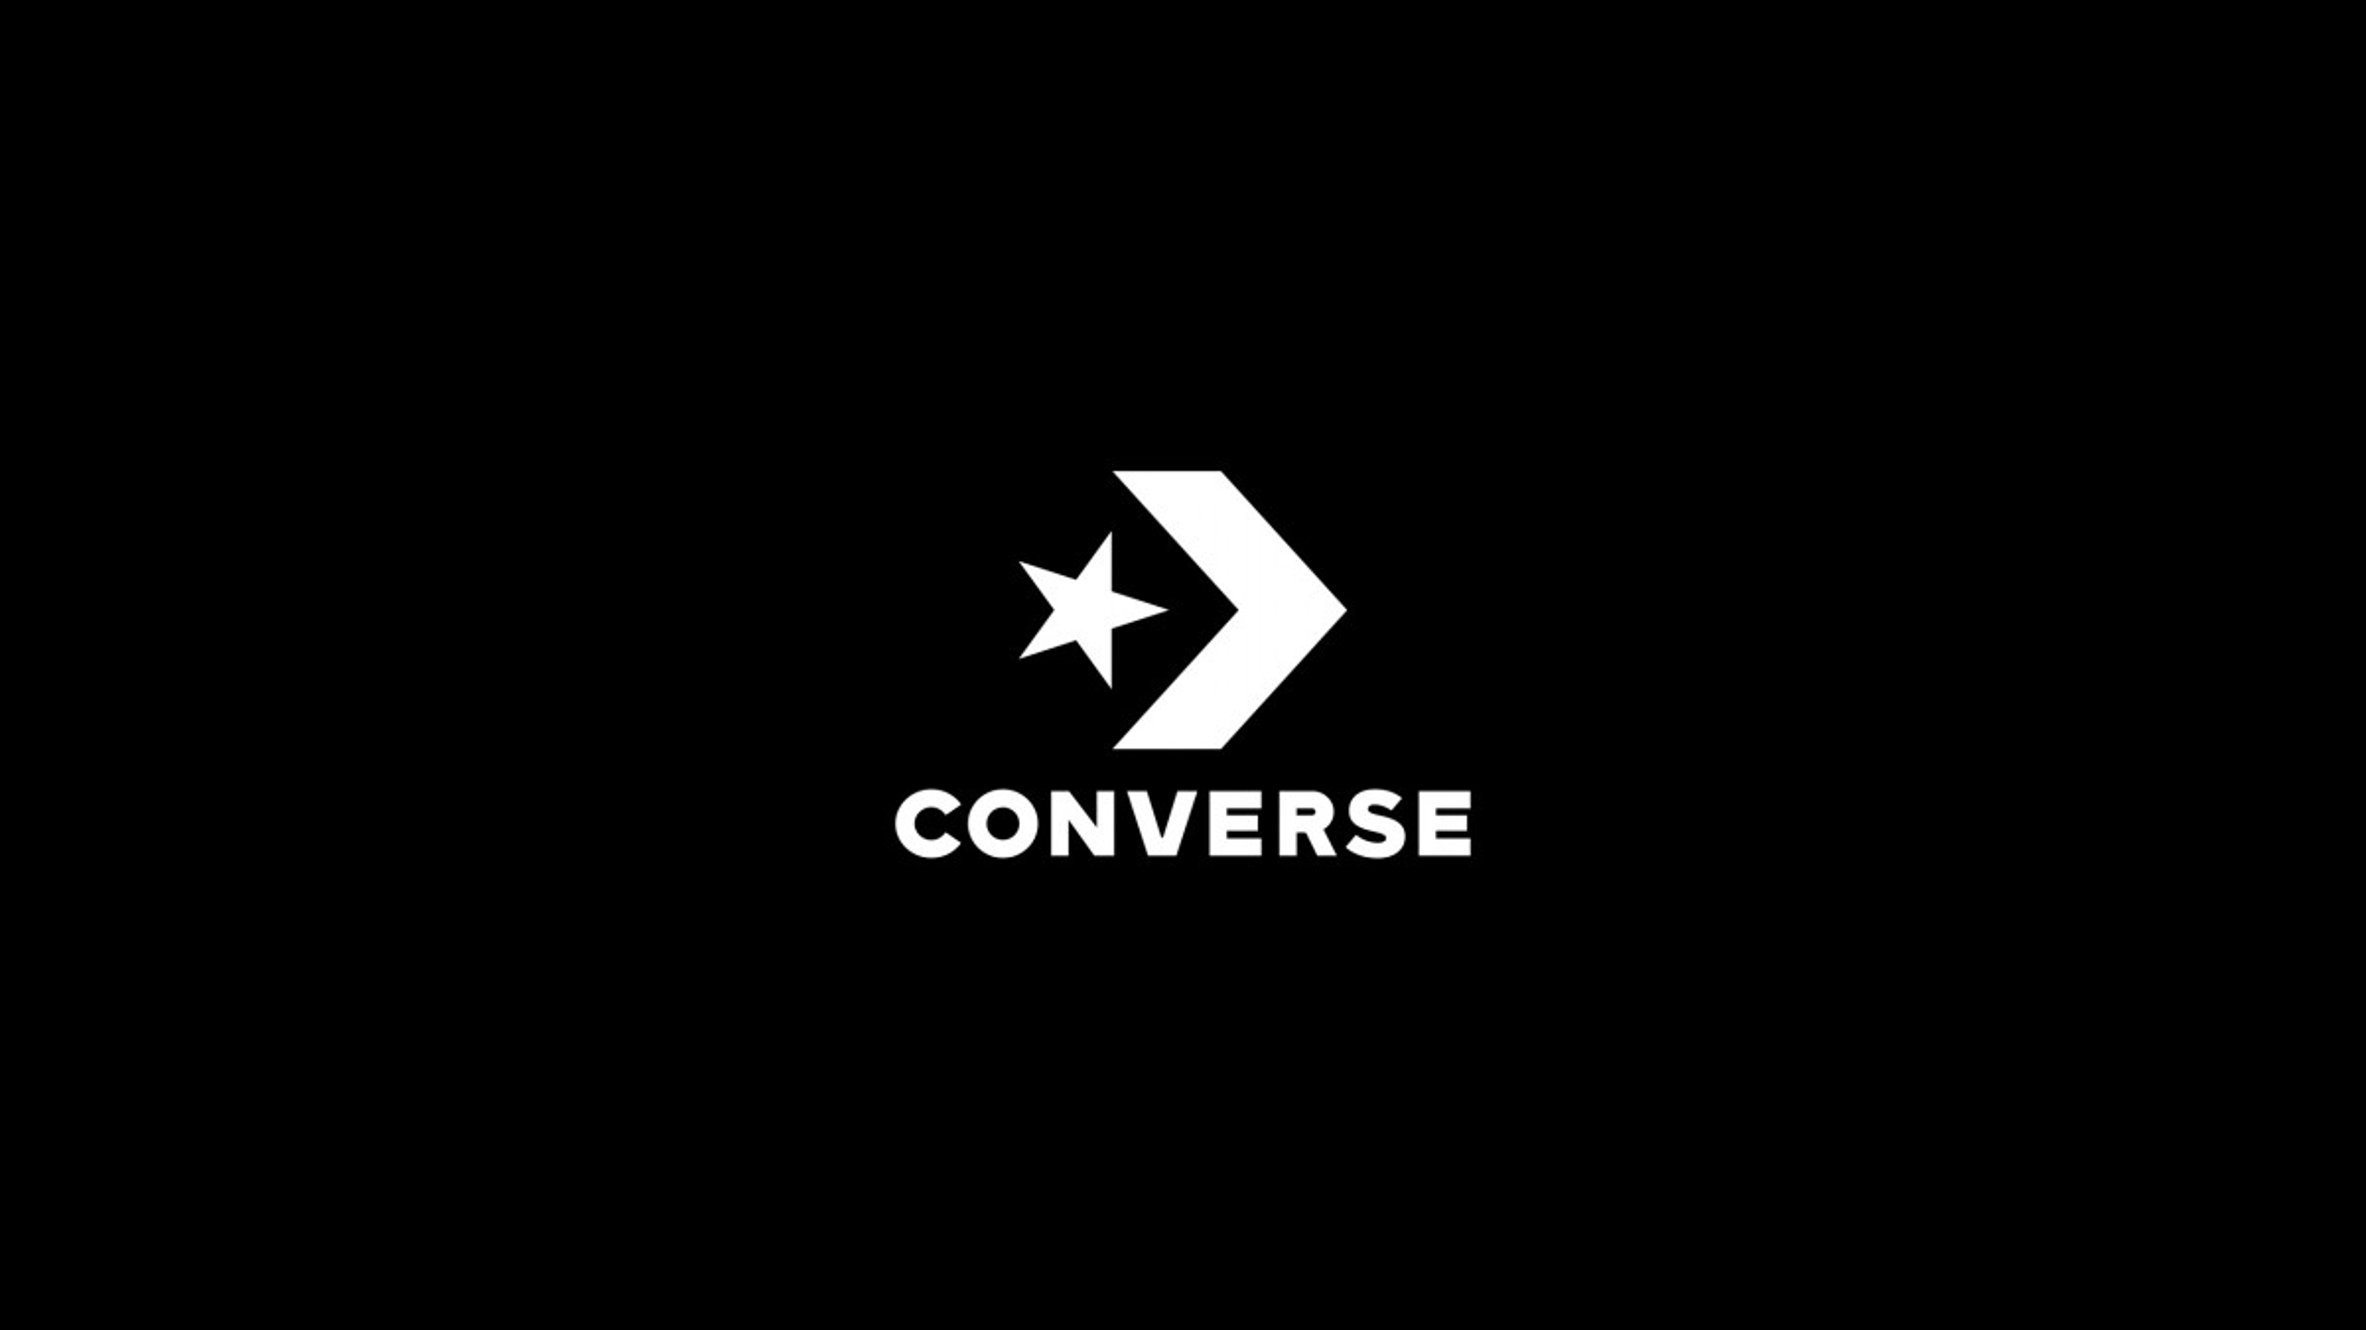 Converse is Casting Skateboarders for a Commercial